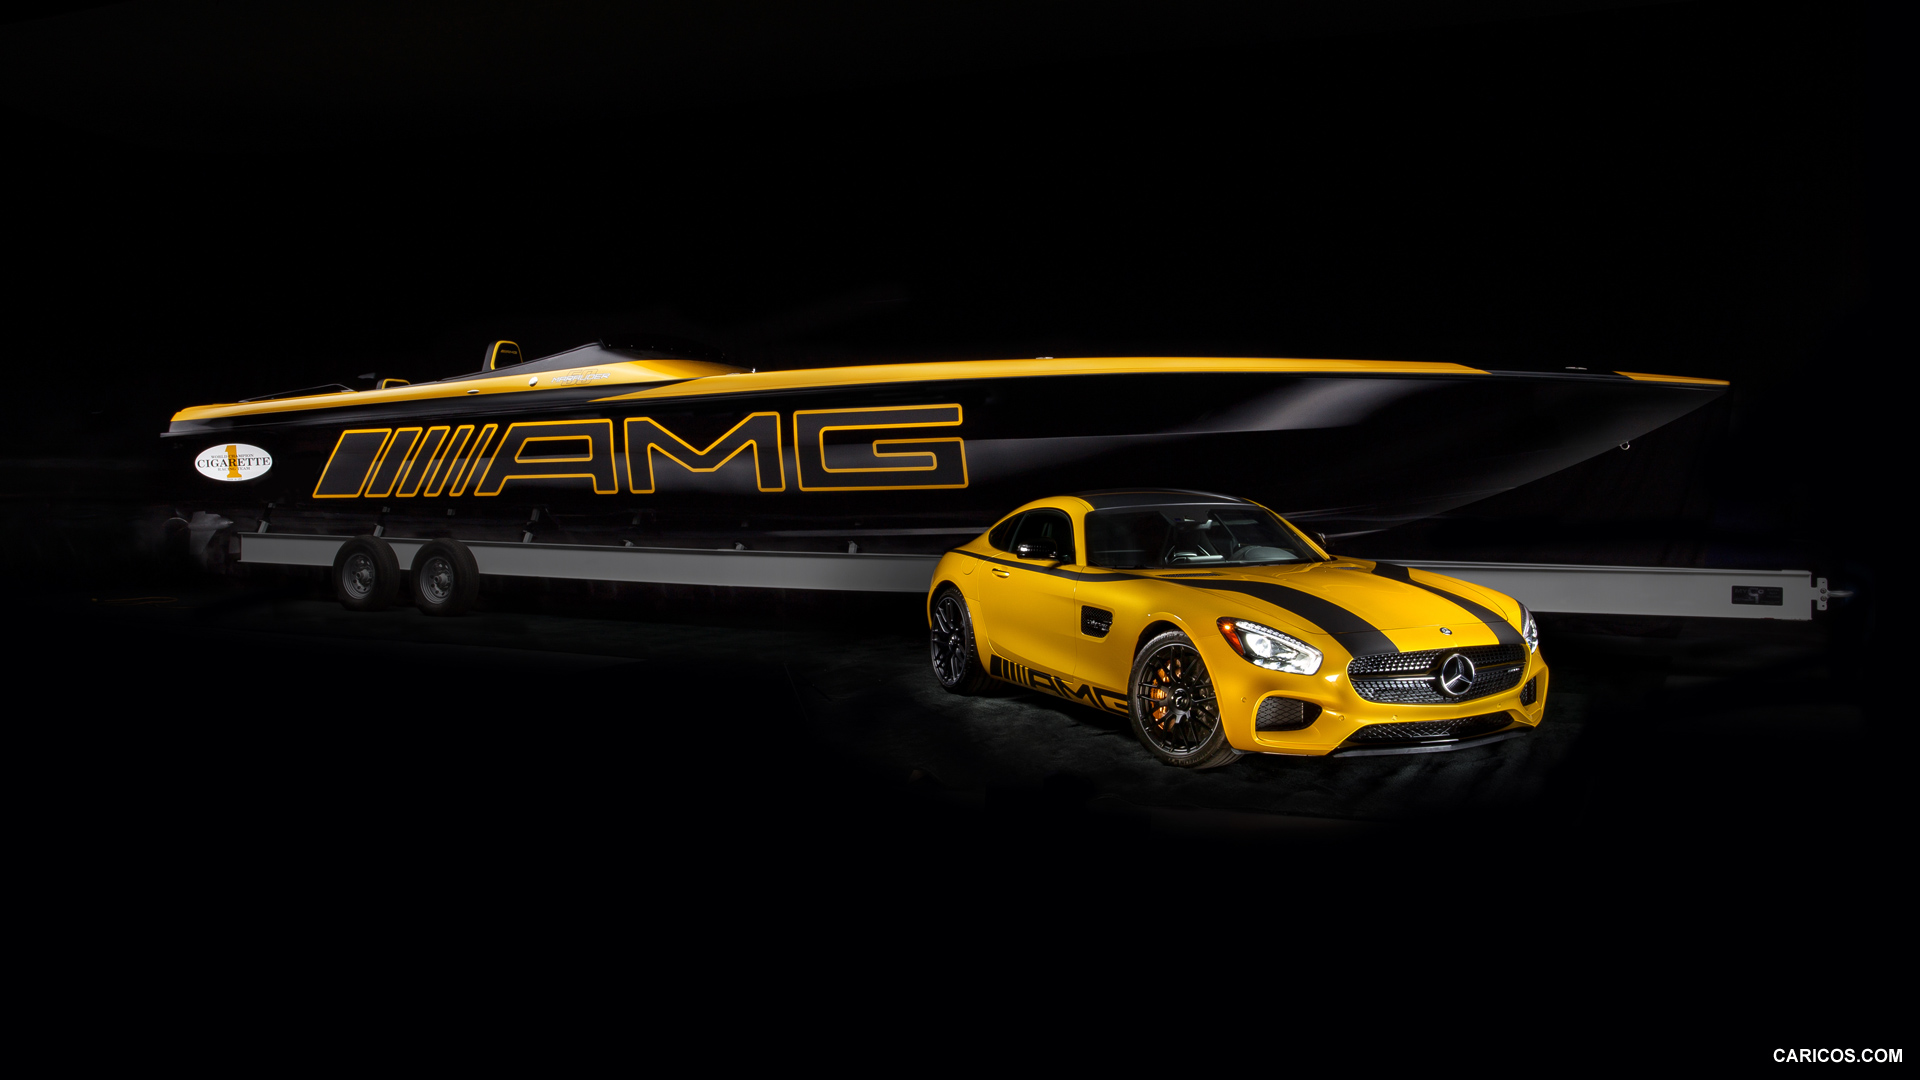 2016 Mercedes-AMG GT S and Cigarette 50 Marauder - Front, #188 of 190